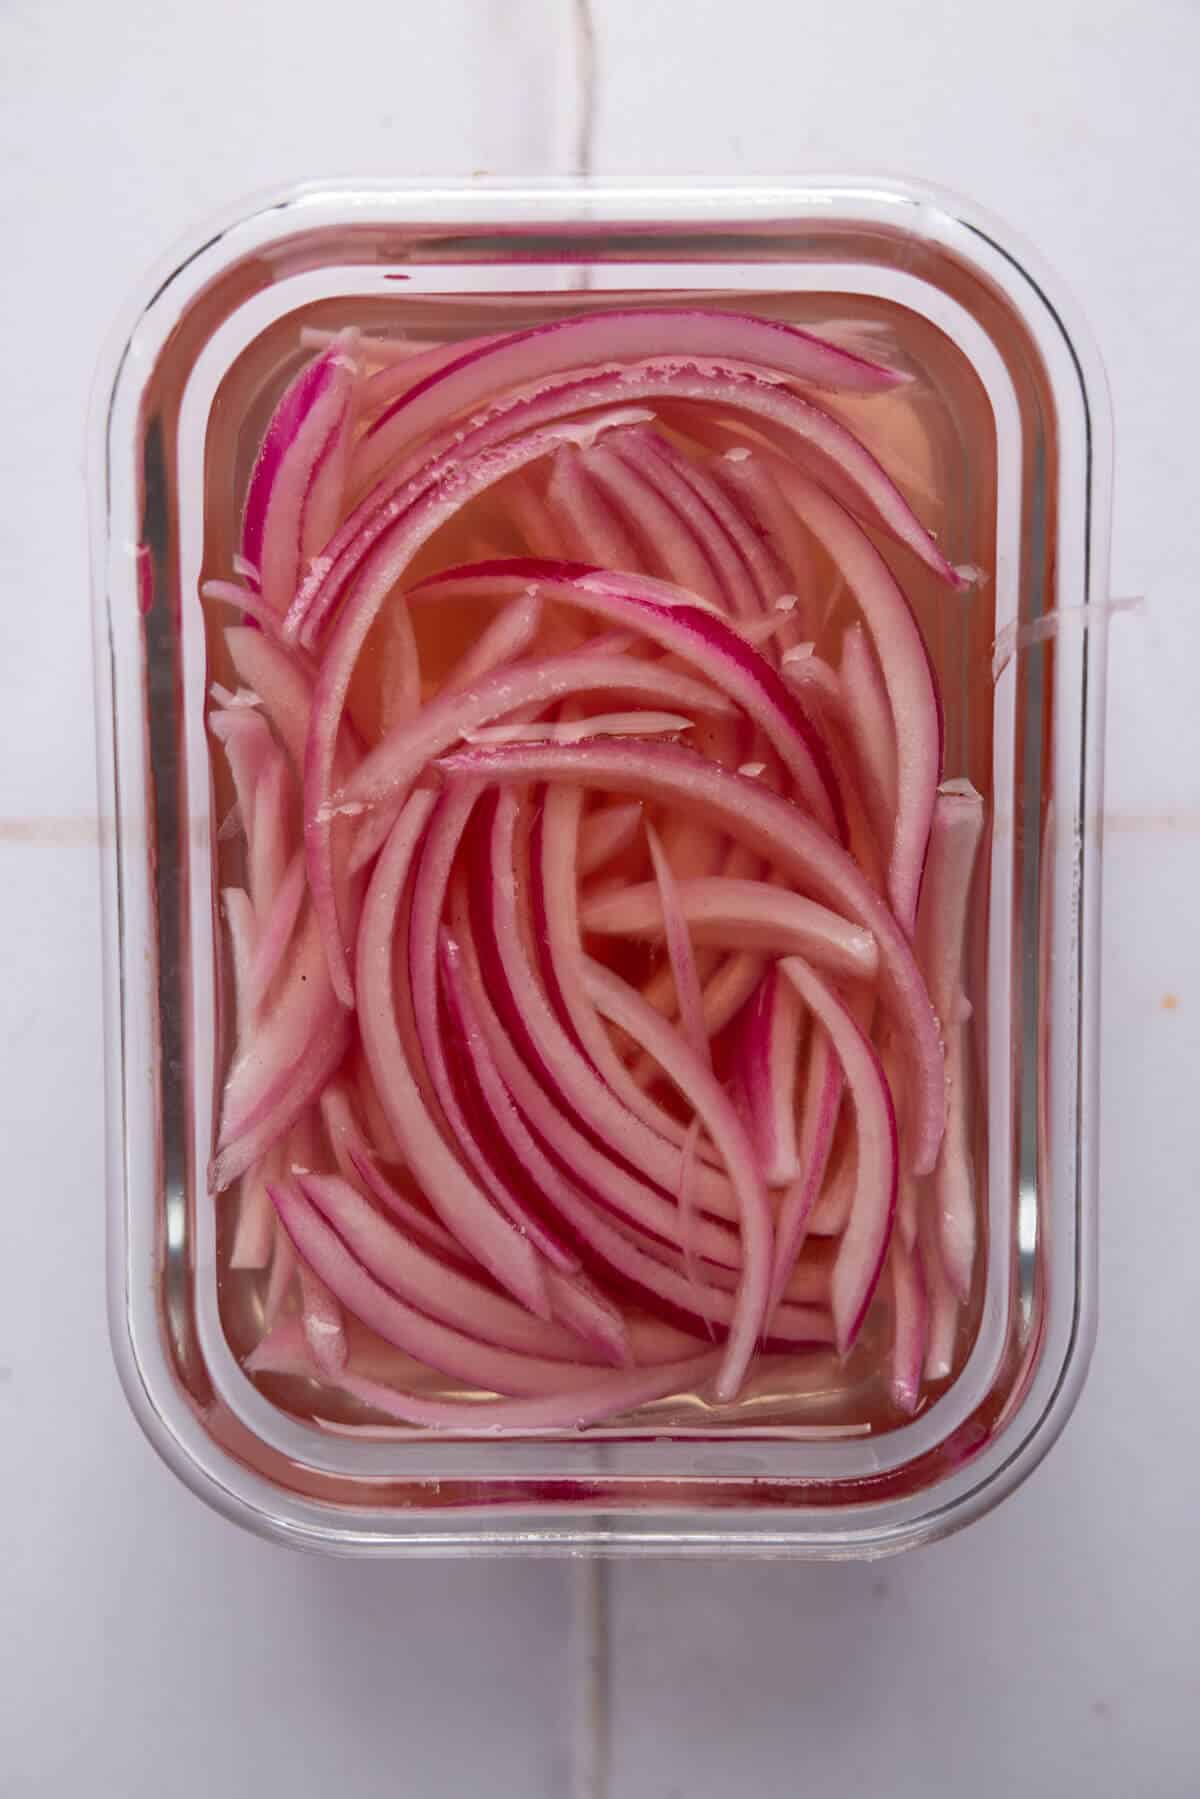 Pickled red onions in a bowl.